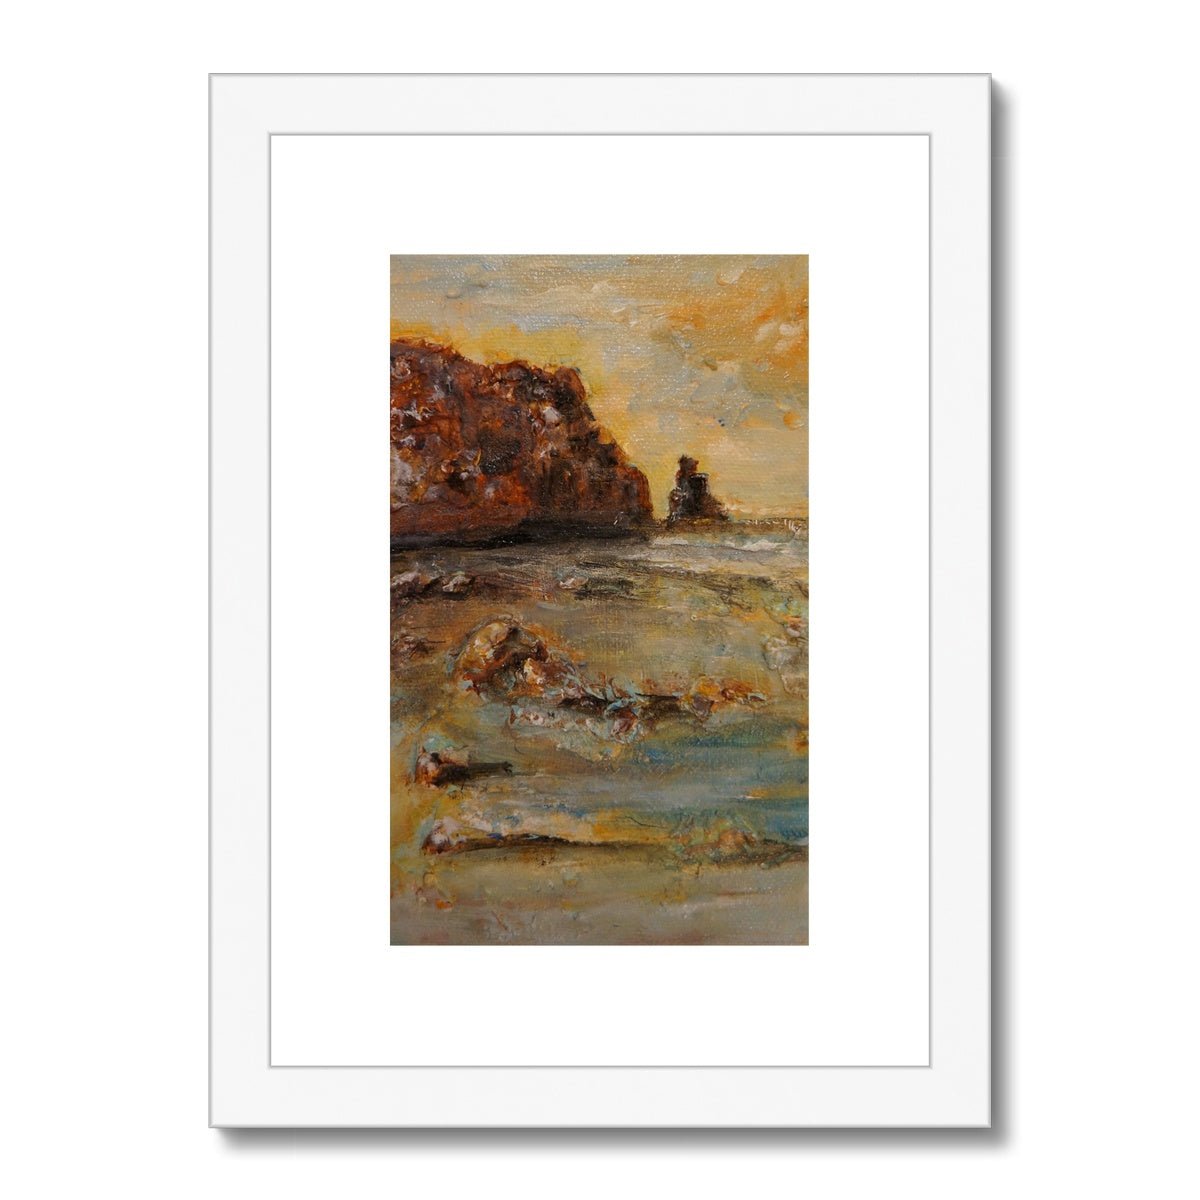 Talisker Bay Skye Painting | Framed & Mounted Prints From Scotland-Framed & Mounted Prints-Skye Art Gallery-A4 Portrait-White Frame-Paintings, Prints, Homeware, Art Gifts From Scotland By Scottish Artist Kevin Hunter